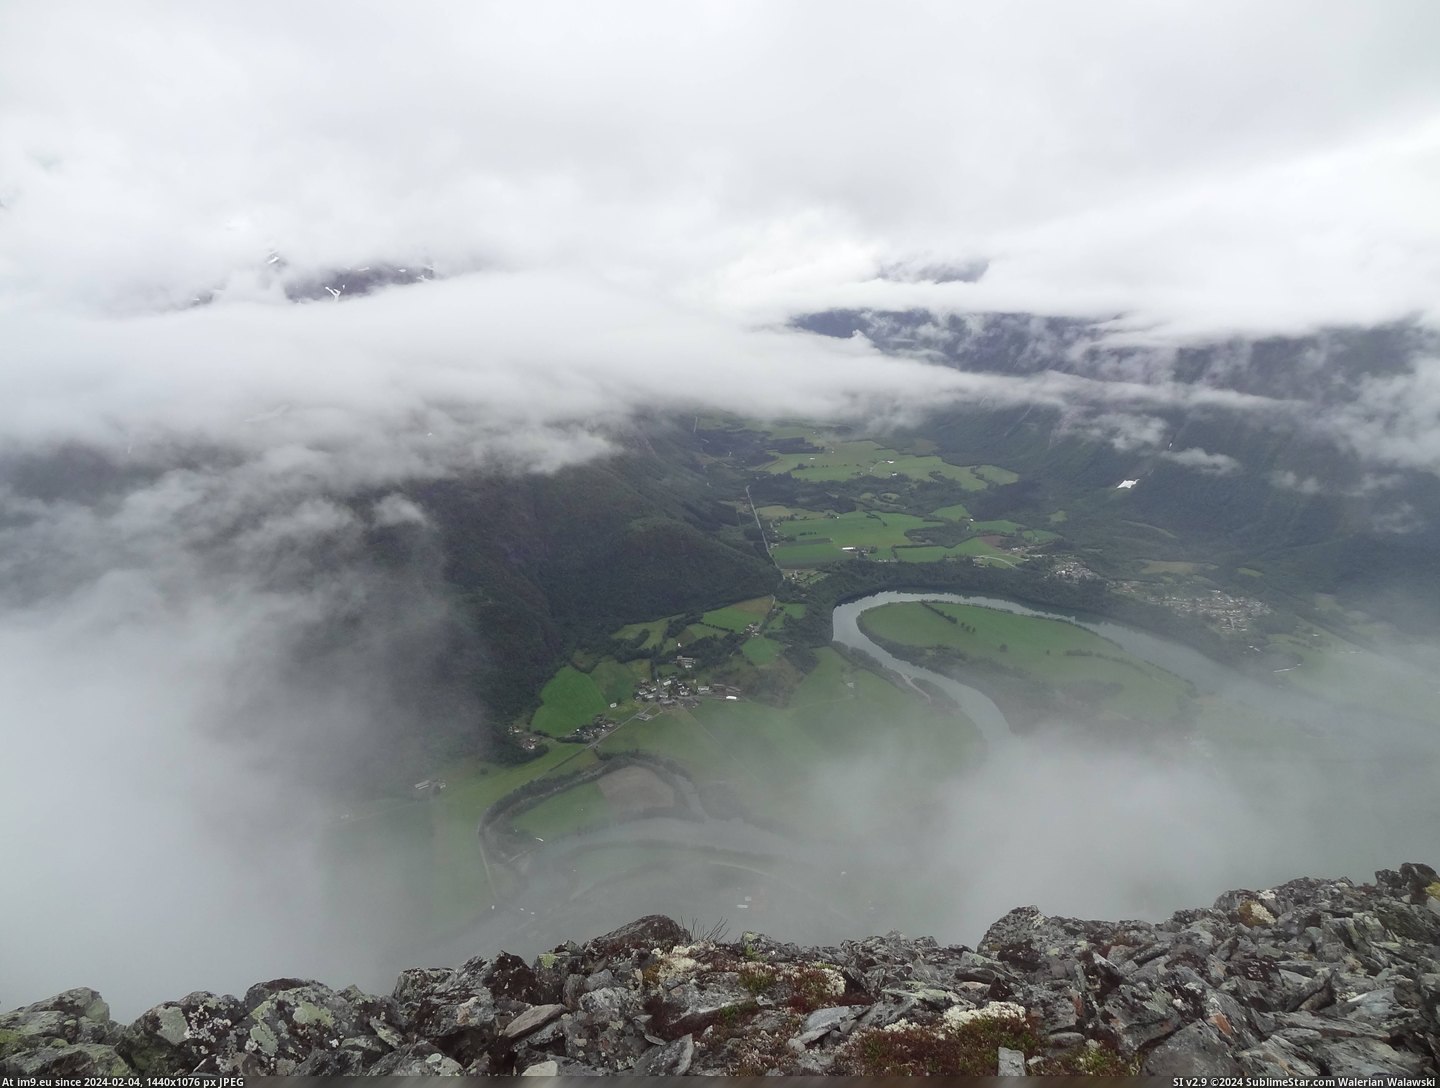 #Valley #4608x3456 #Ridge #Clouds [Earthporn]  Looking through the clouds to the valley below, on the Romsdalseggen Ridge [4608x3456] Pic. (Bild von album My r/EARTHPORN favs))